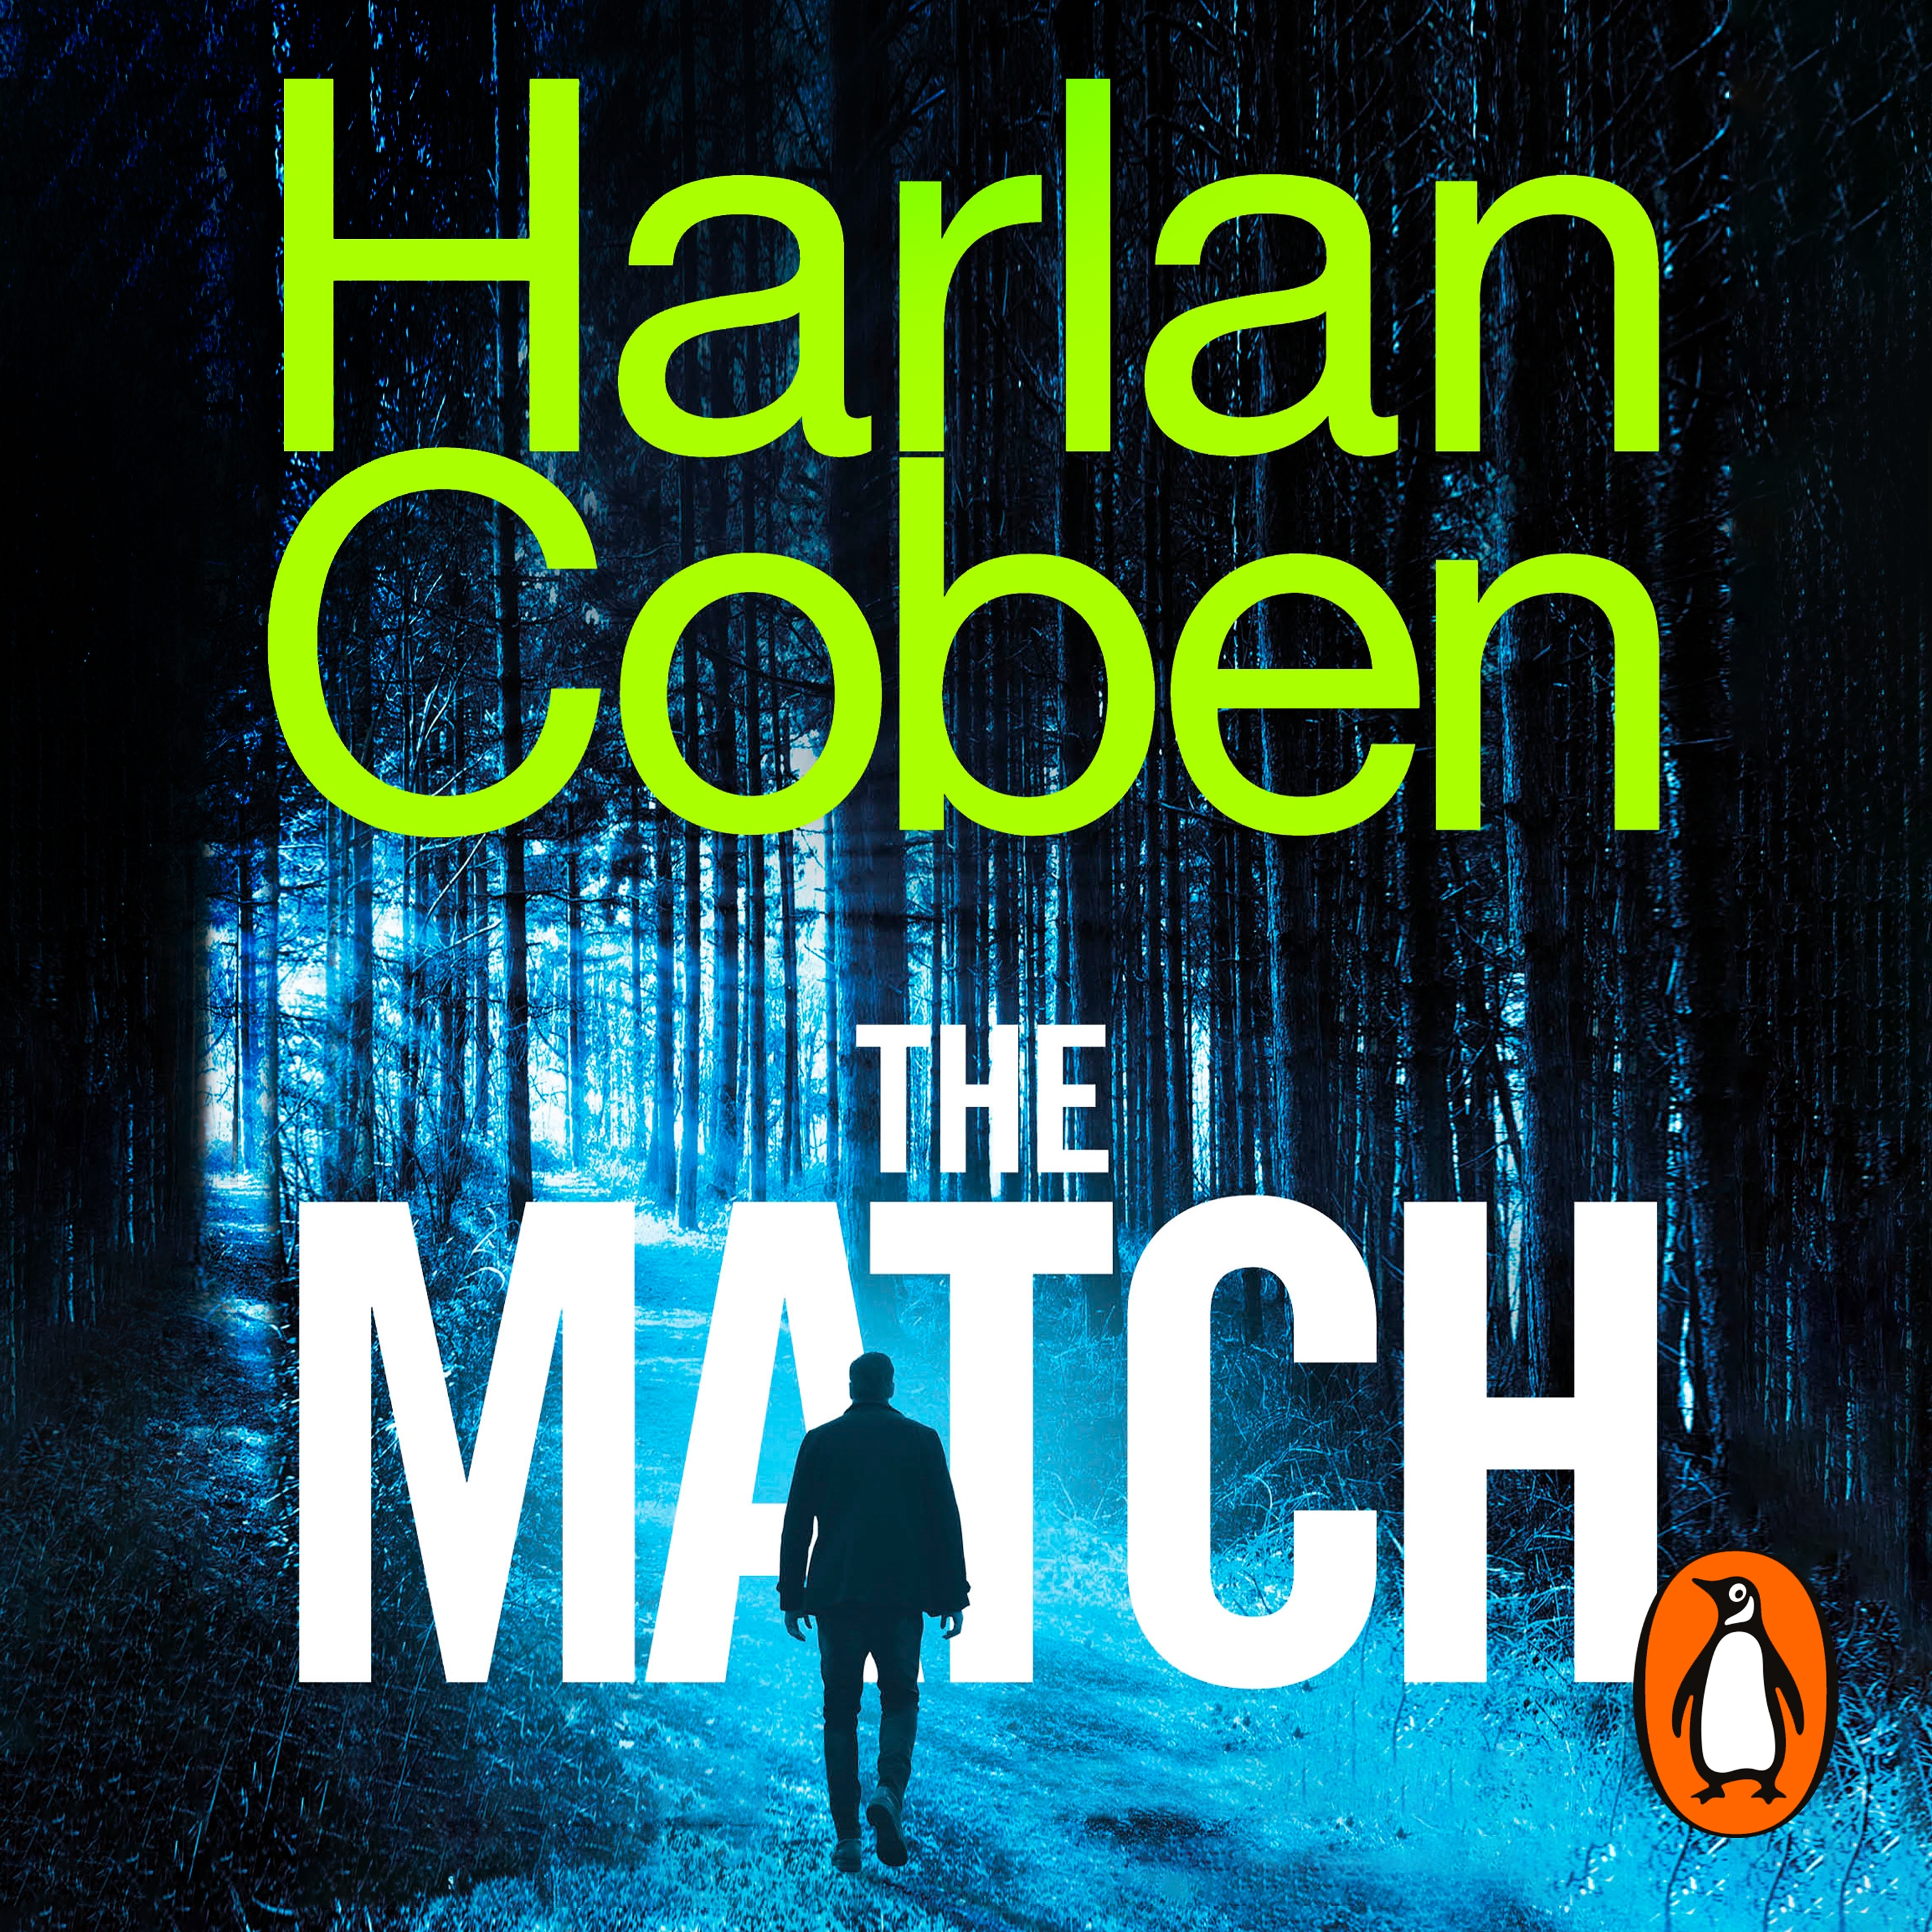 Cover of The Match by Harlan Coben. Silhouette of a man walking in a dark and dense forest. The author's name is in large green font at the top, and the title is in white across the bottom.